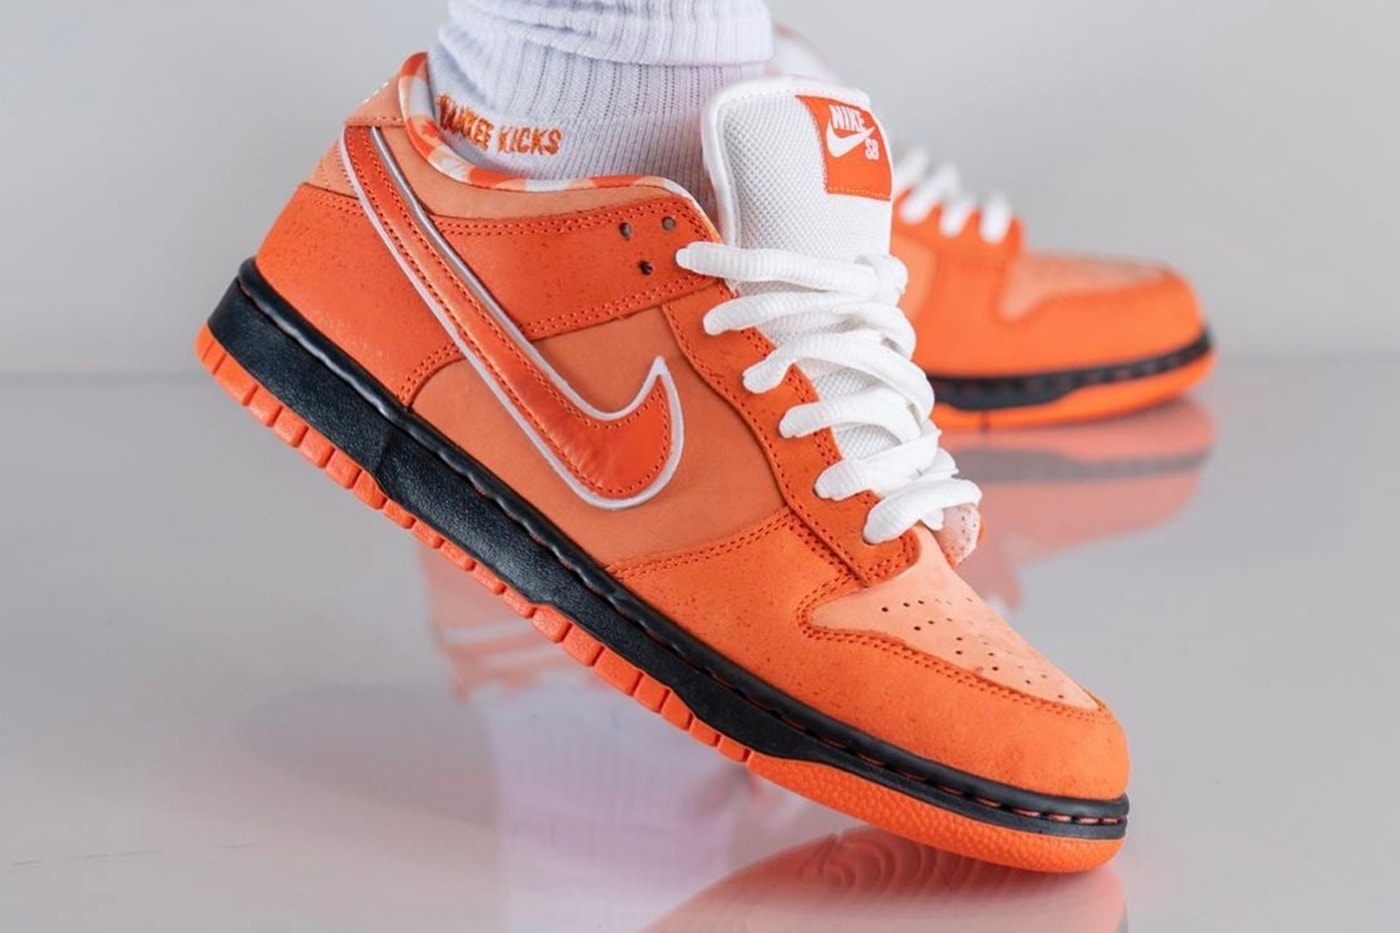 https://image-cdn.hypb.st/https%3A%2F%2Fhypebeast.com%2Fimage%2F2022%2F08%2Fconcepts-nike-sb-dunk-low-orange-lobster-on-foot-look-release-info-fd8776-800-001.jpg?cbr=1&q=90